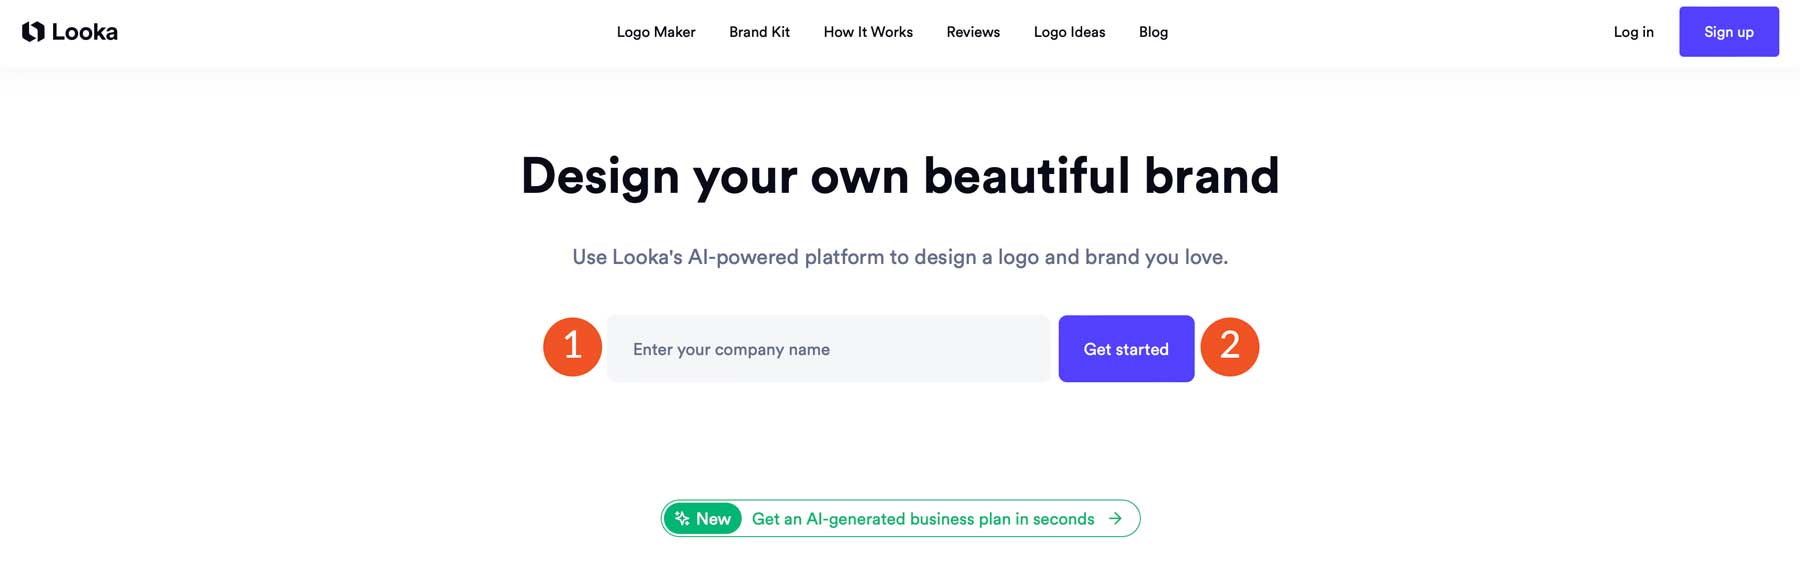 Get started with Looka